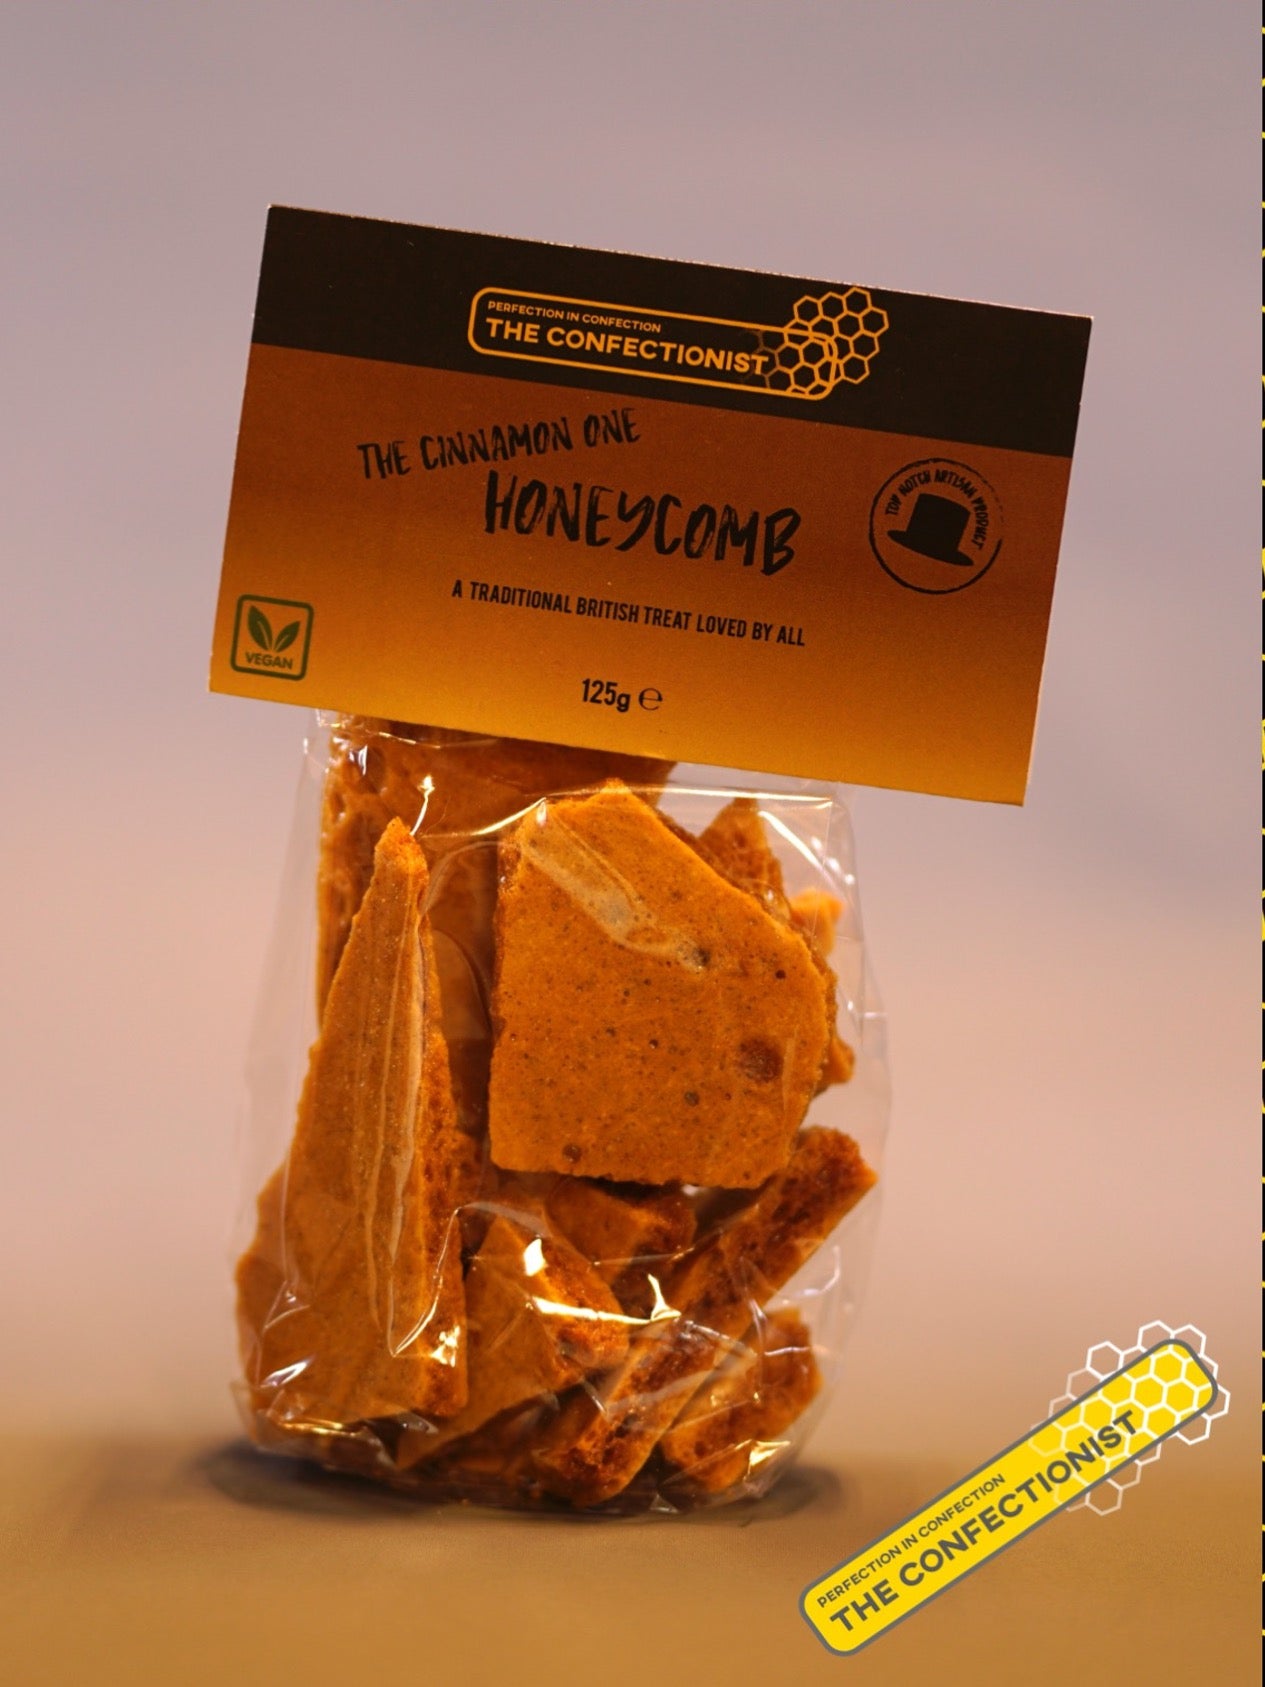 The Confectionist's Cinnamon Honeycomb 125g